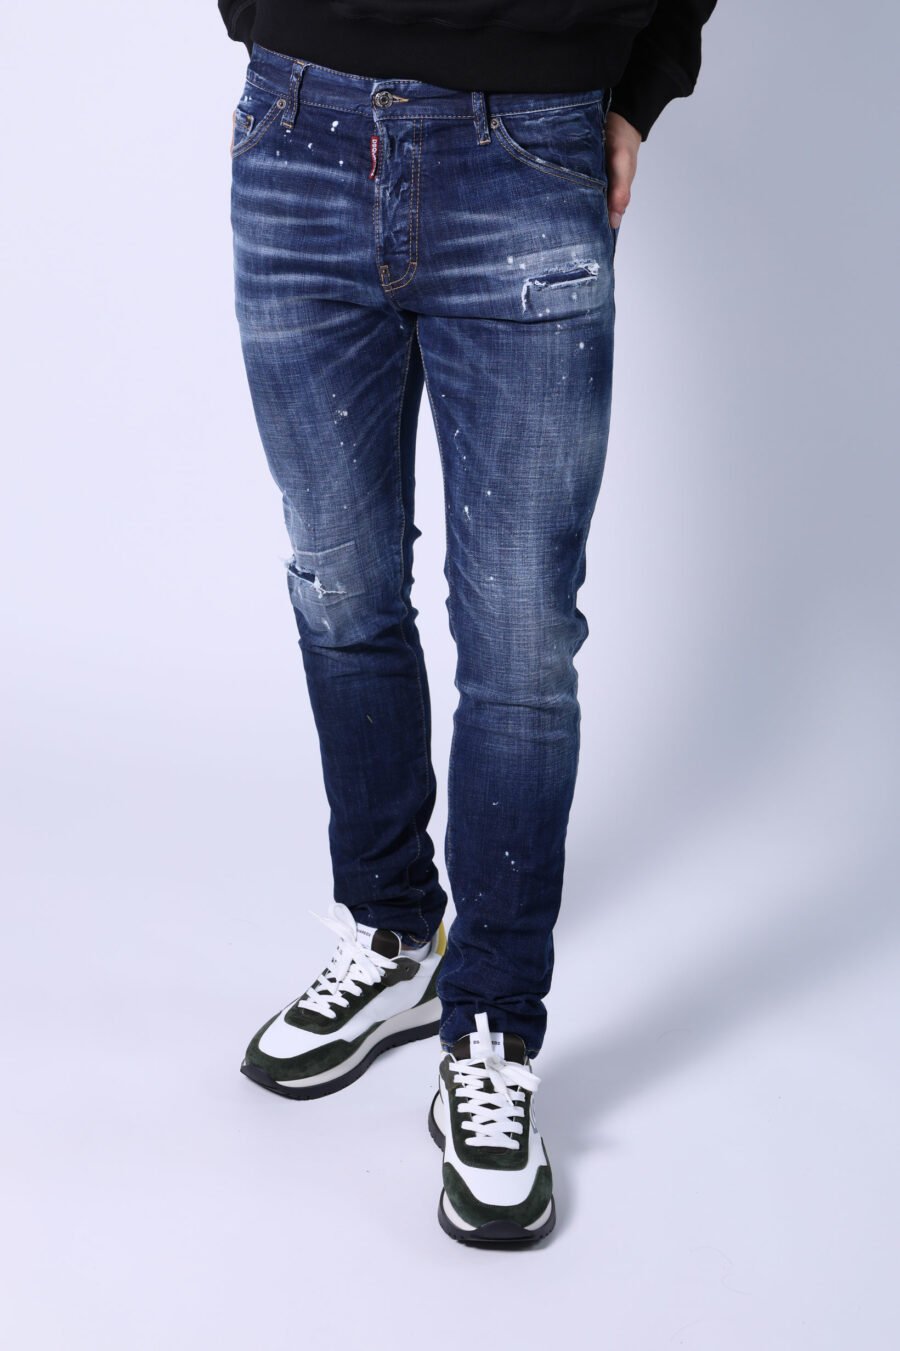 Blue "cool guy jean" jeans with paint and frayed - Untitled Catalog 05412